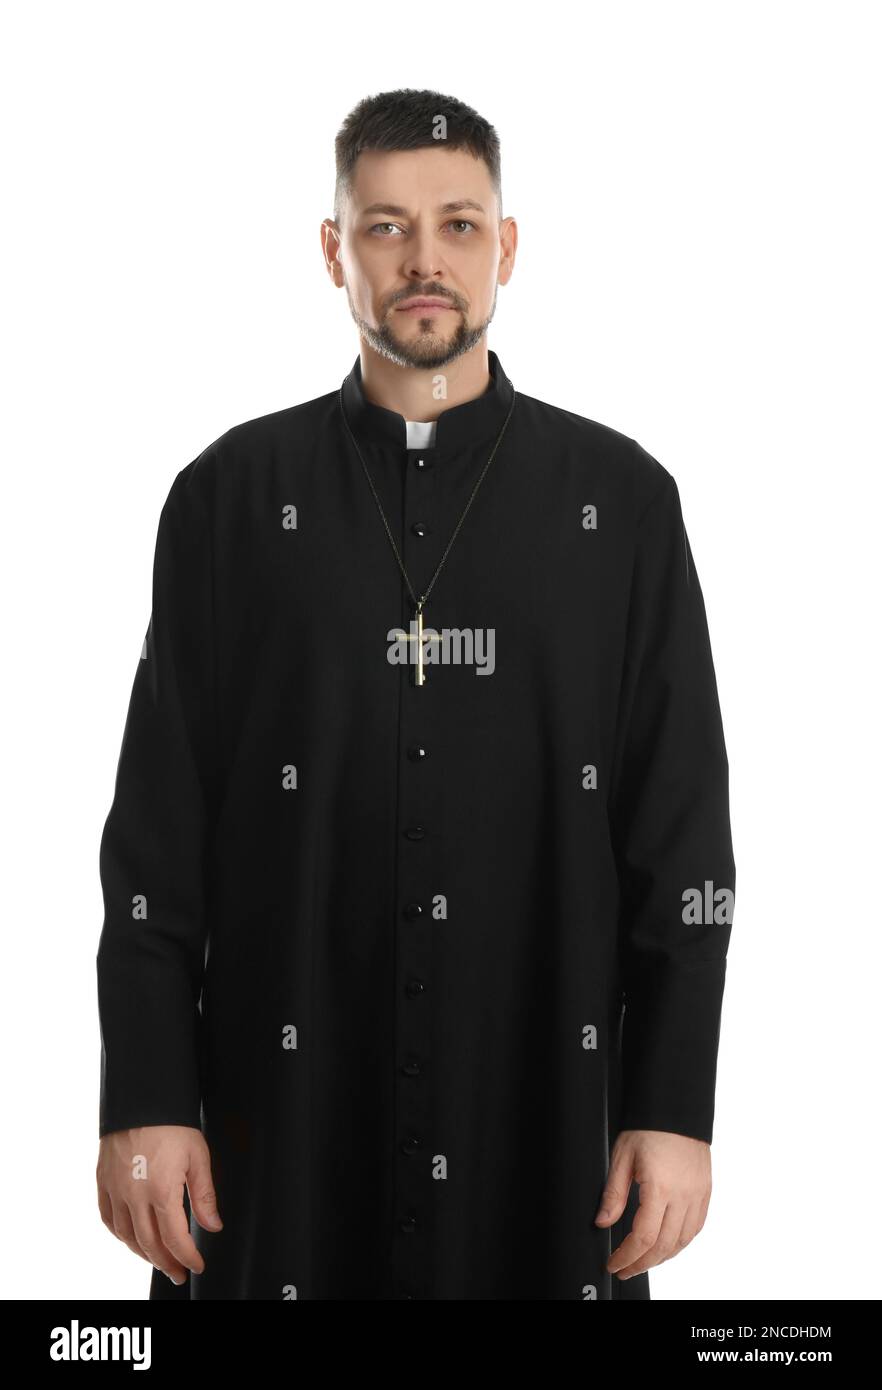 Priest wearing cassock with clerical collar on white background Stock Photo